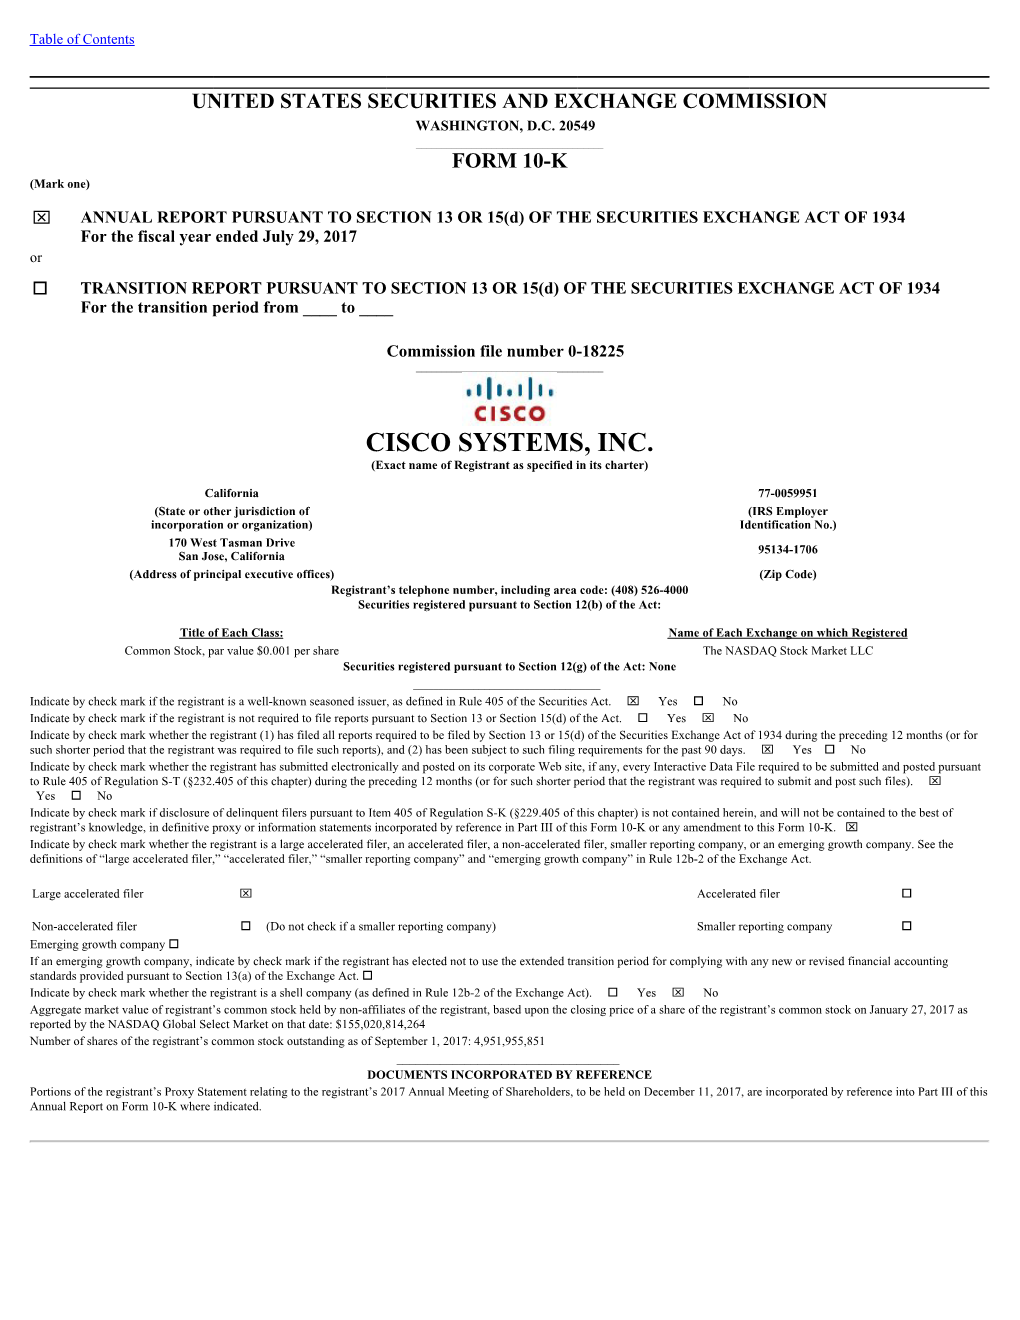 CISCO SYSTEMS, INC. (Exact Name of Registrant As Specified in Its Charter)